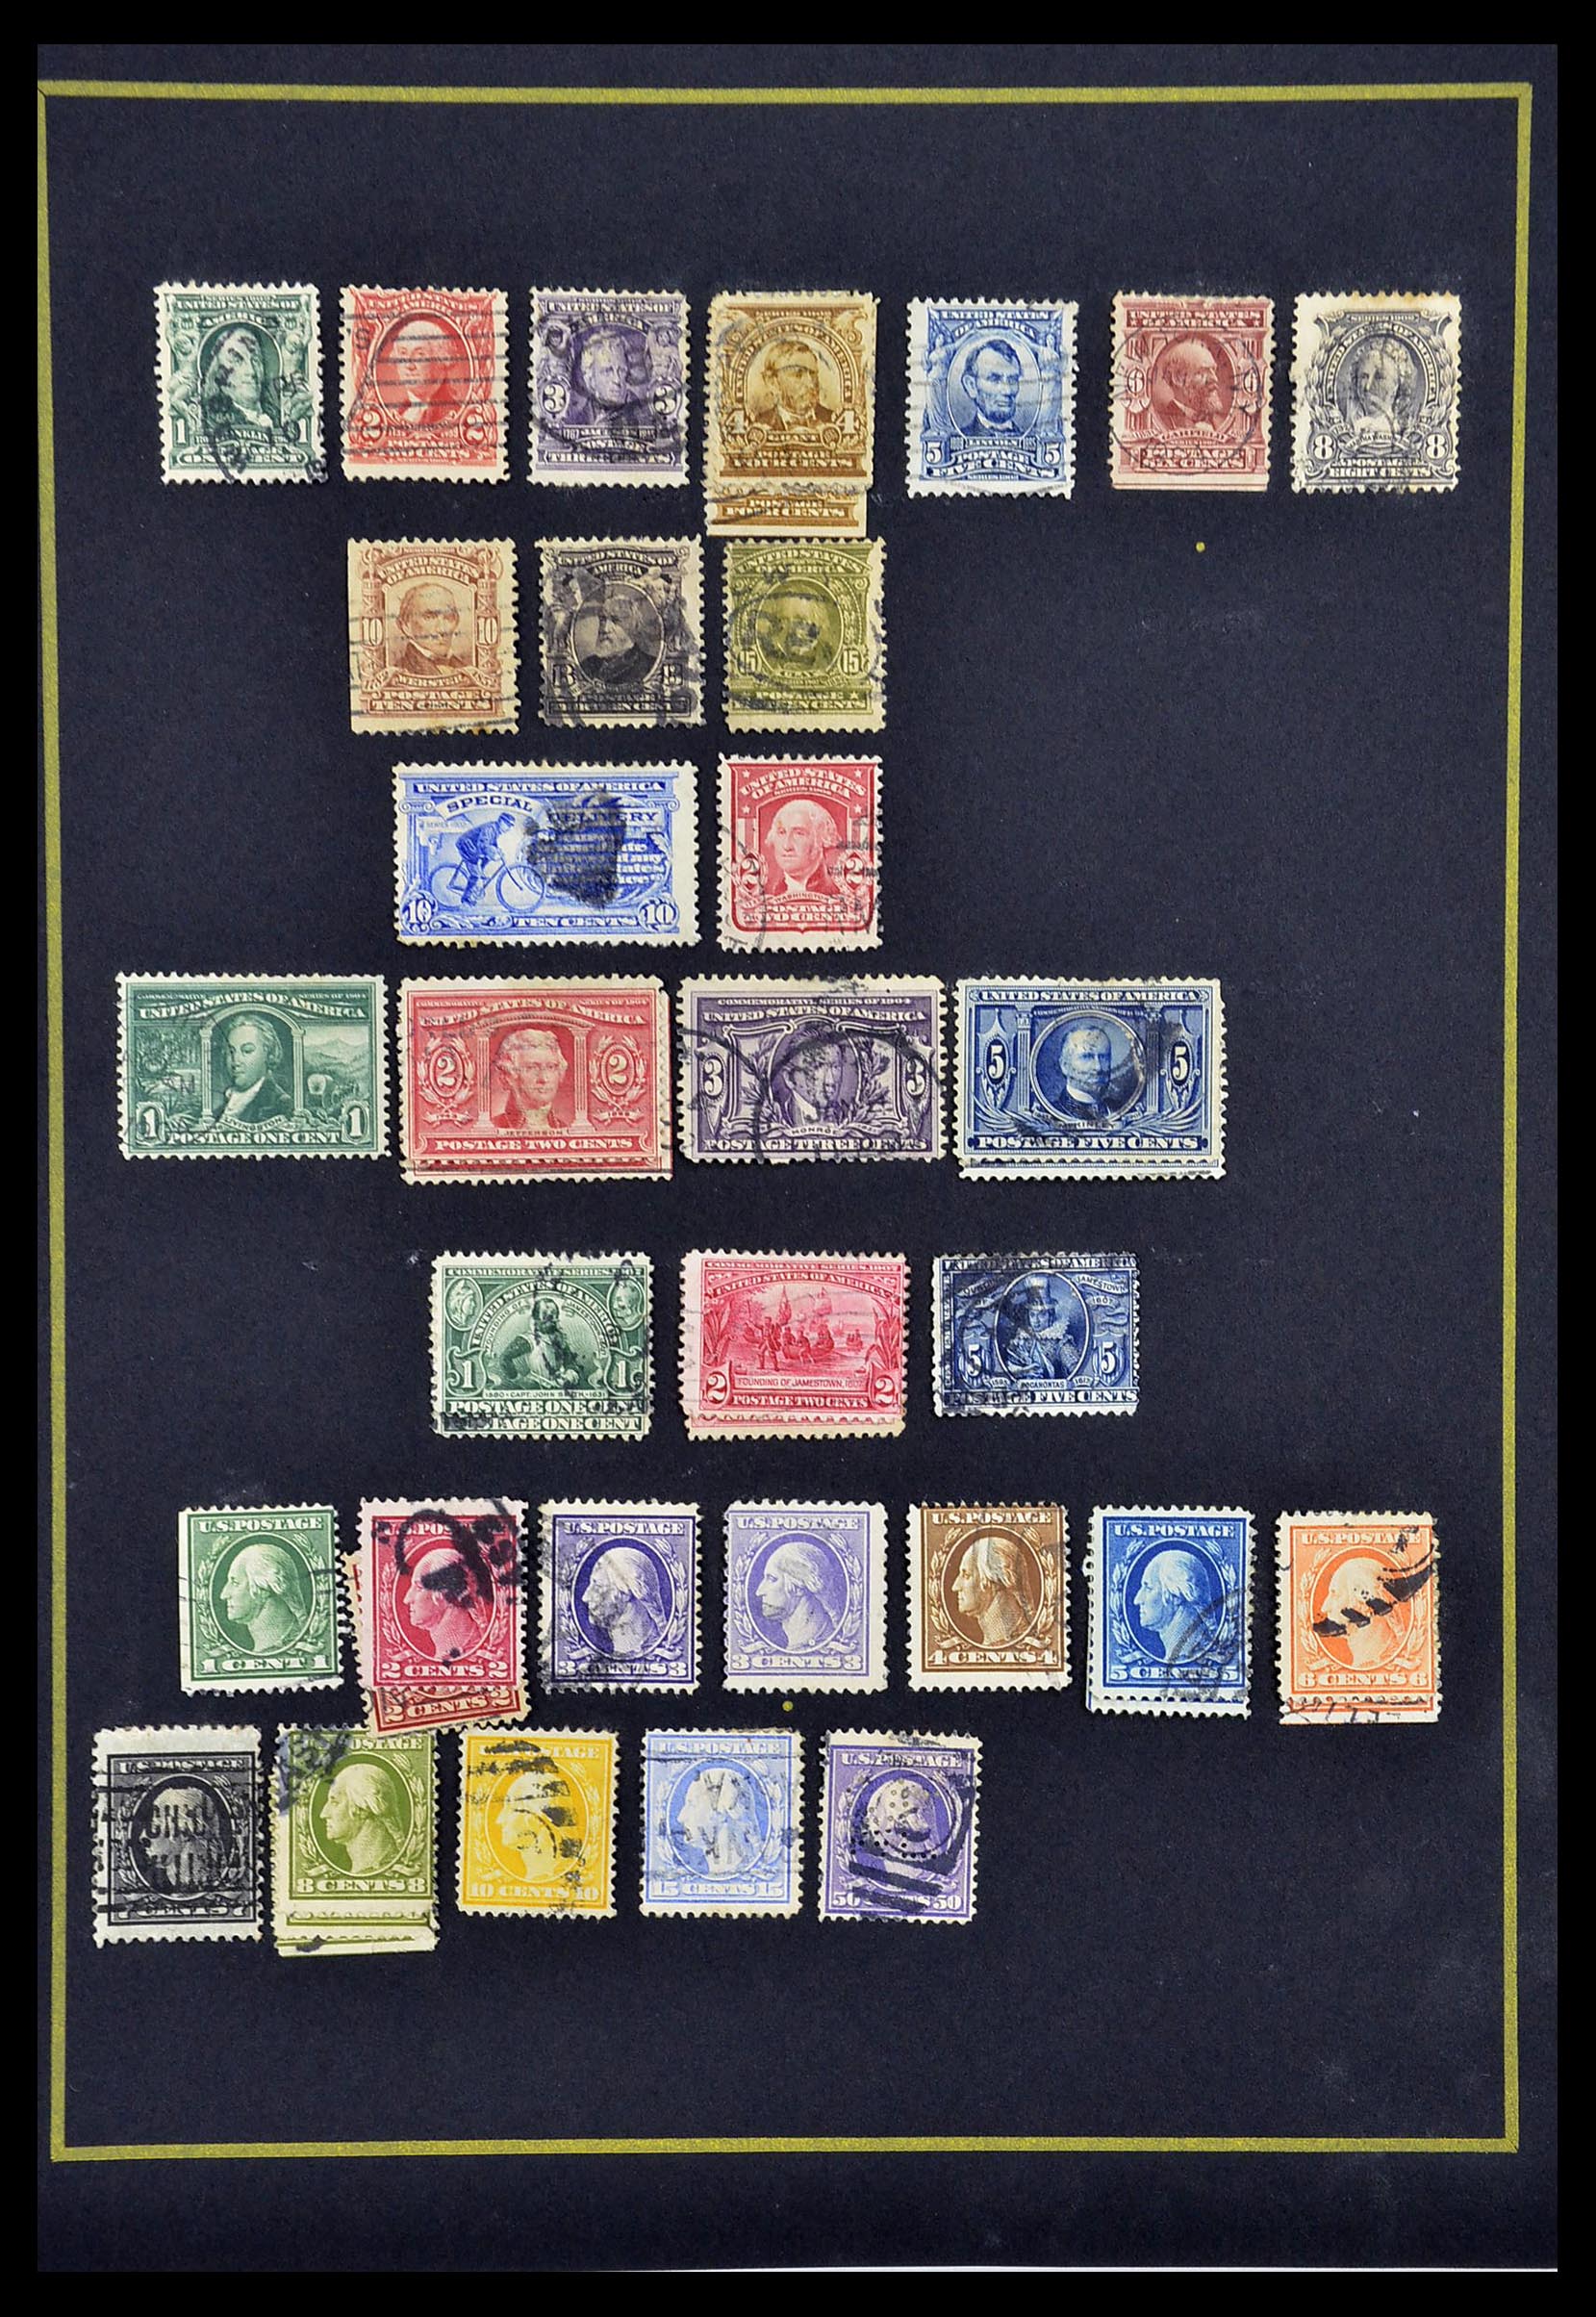 34020 005 - Stamp collection 34020 USA classic 1857-1920.